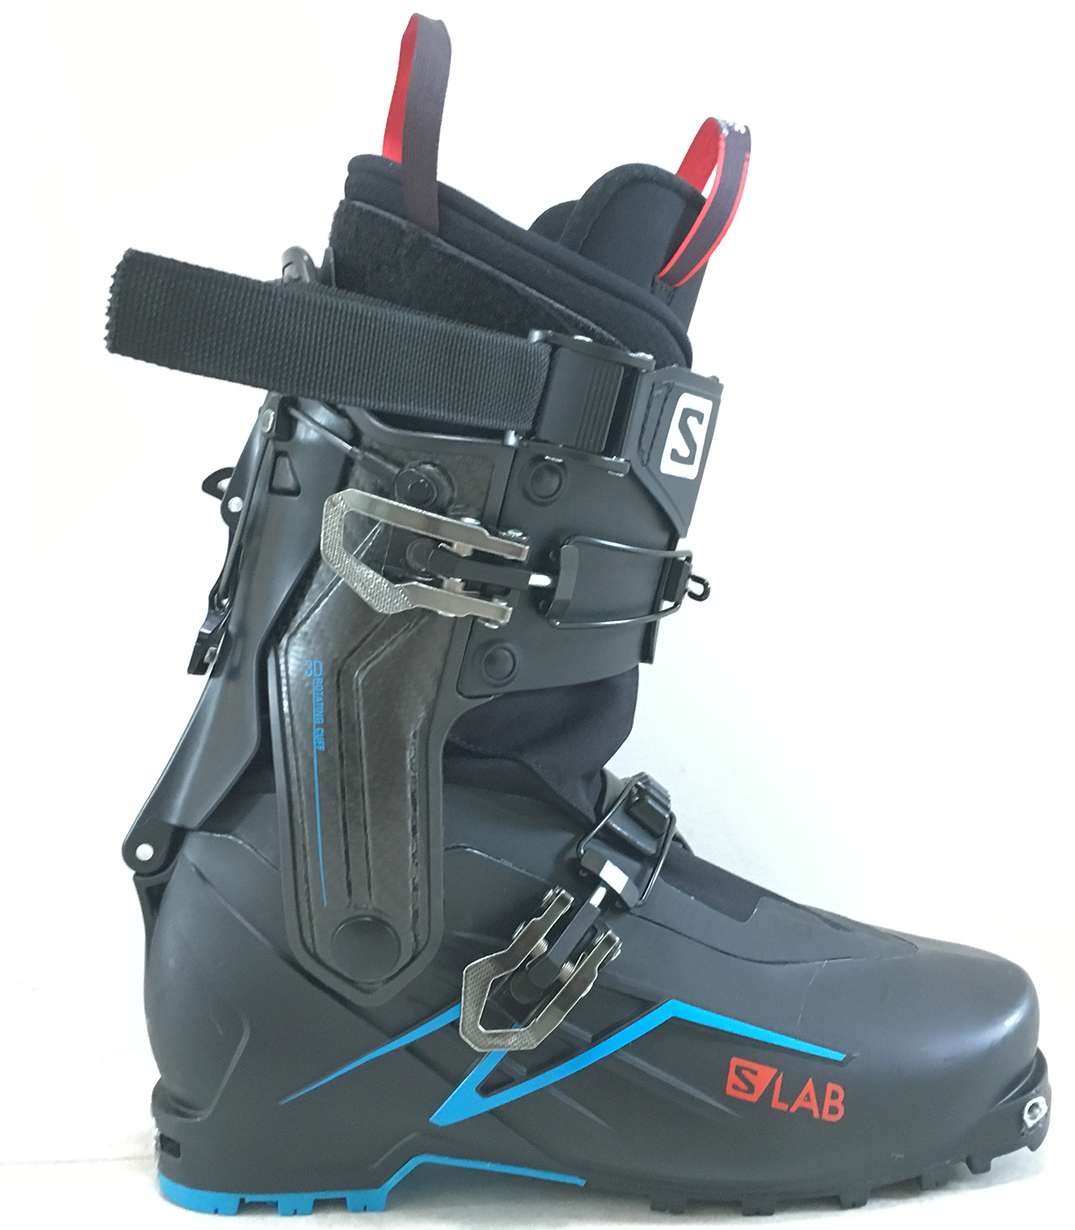 Blister Gear Review reviews the Salomon S-Lab X-Alp boot for Blister Gear Review.